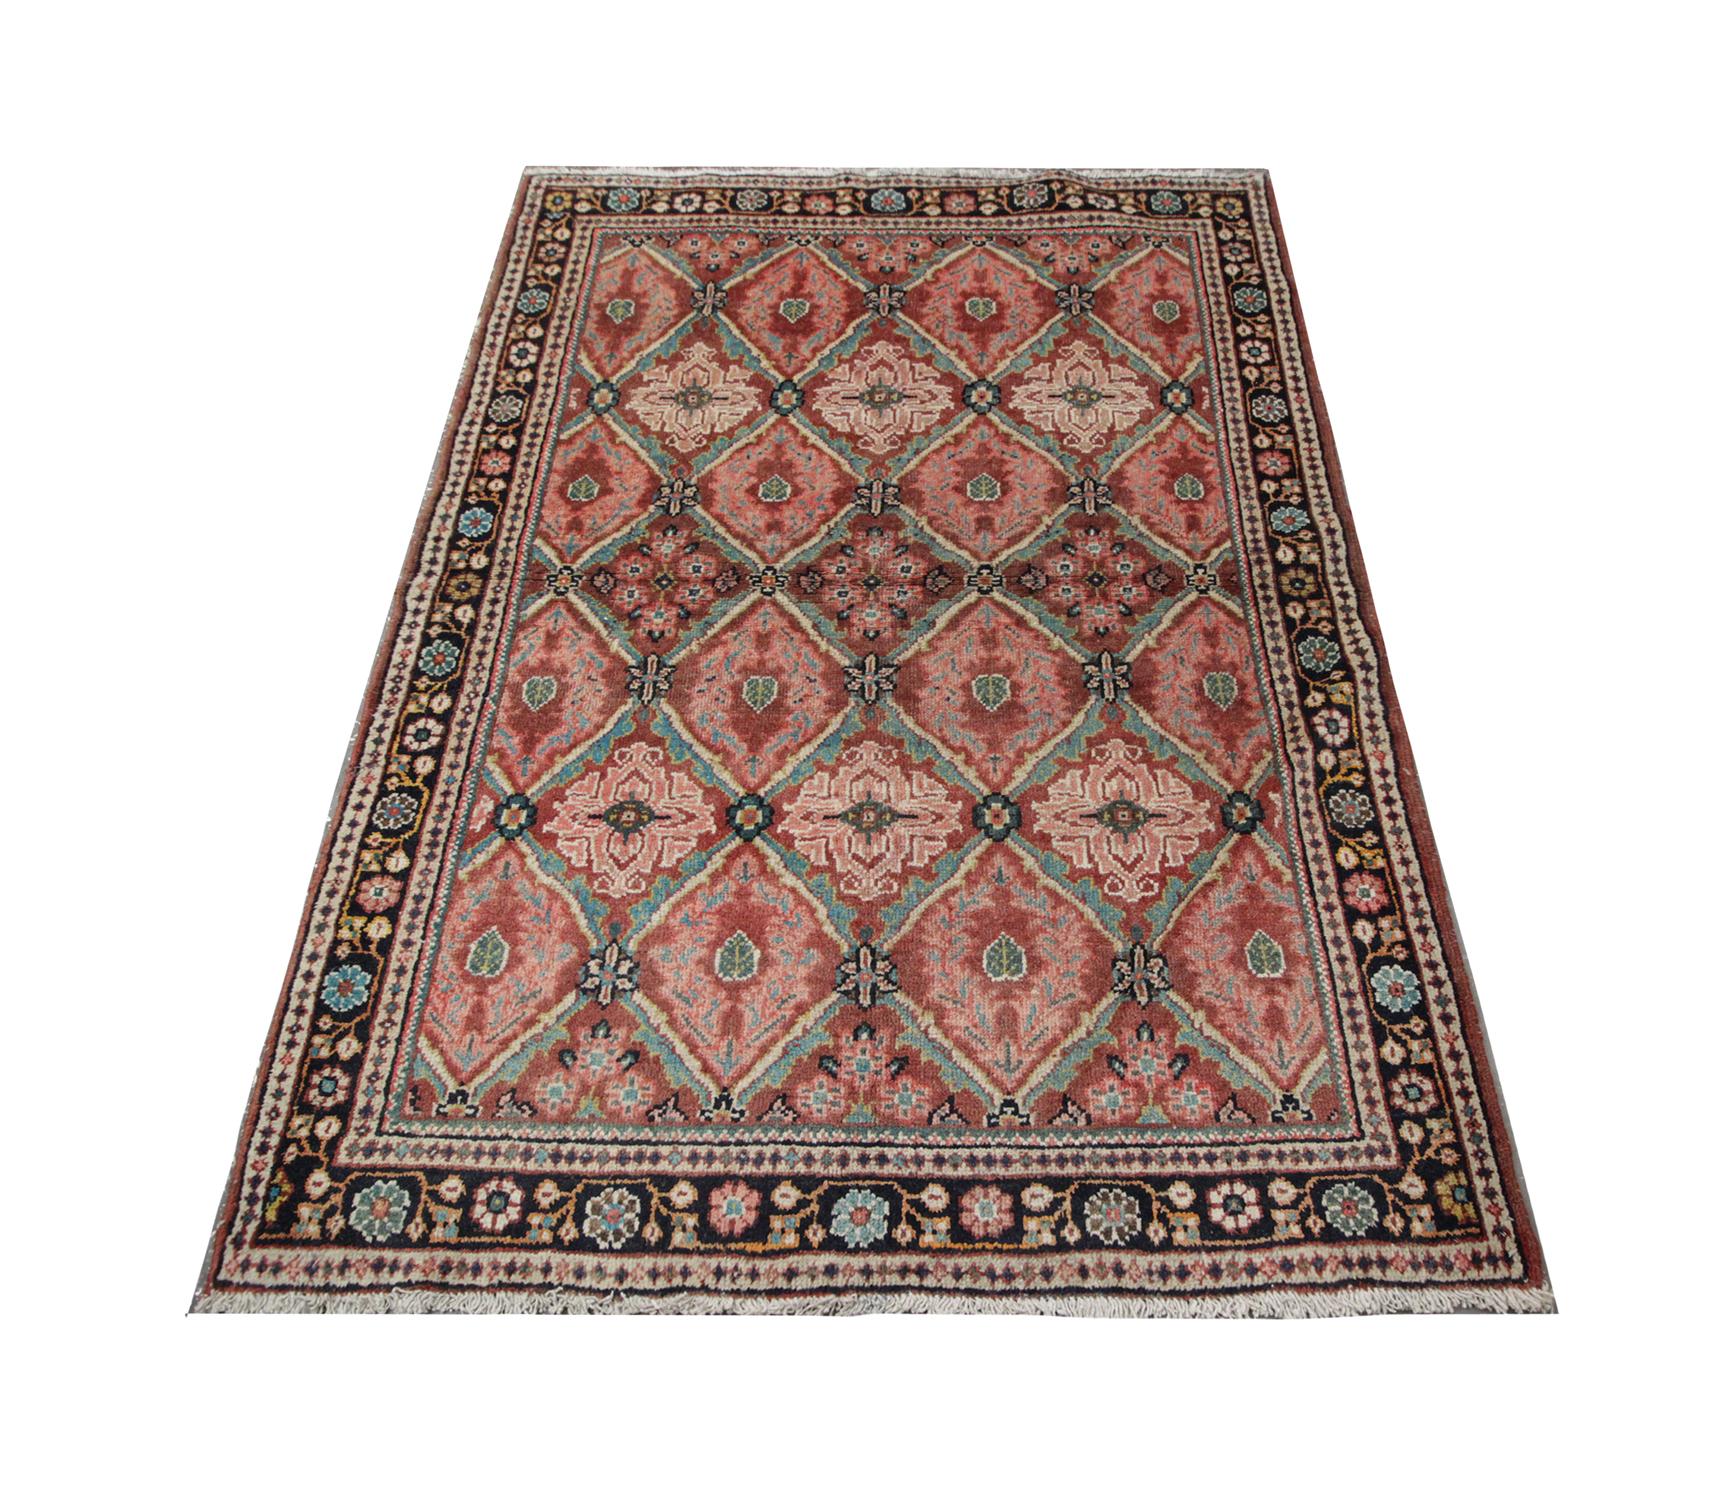 Bright pink, red and green tones cover this Oriental rug in the all-over repeat pattern. The intricate design reveals diamonds woven with detail, this is enclosed by a floral motif border. This handmade carpet is then finished with a fringe detail